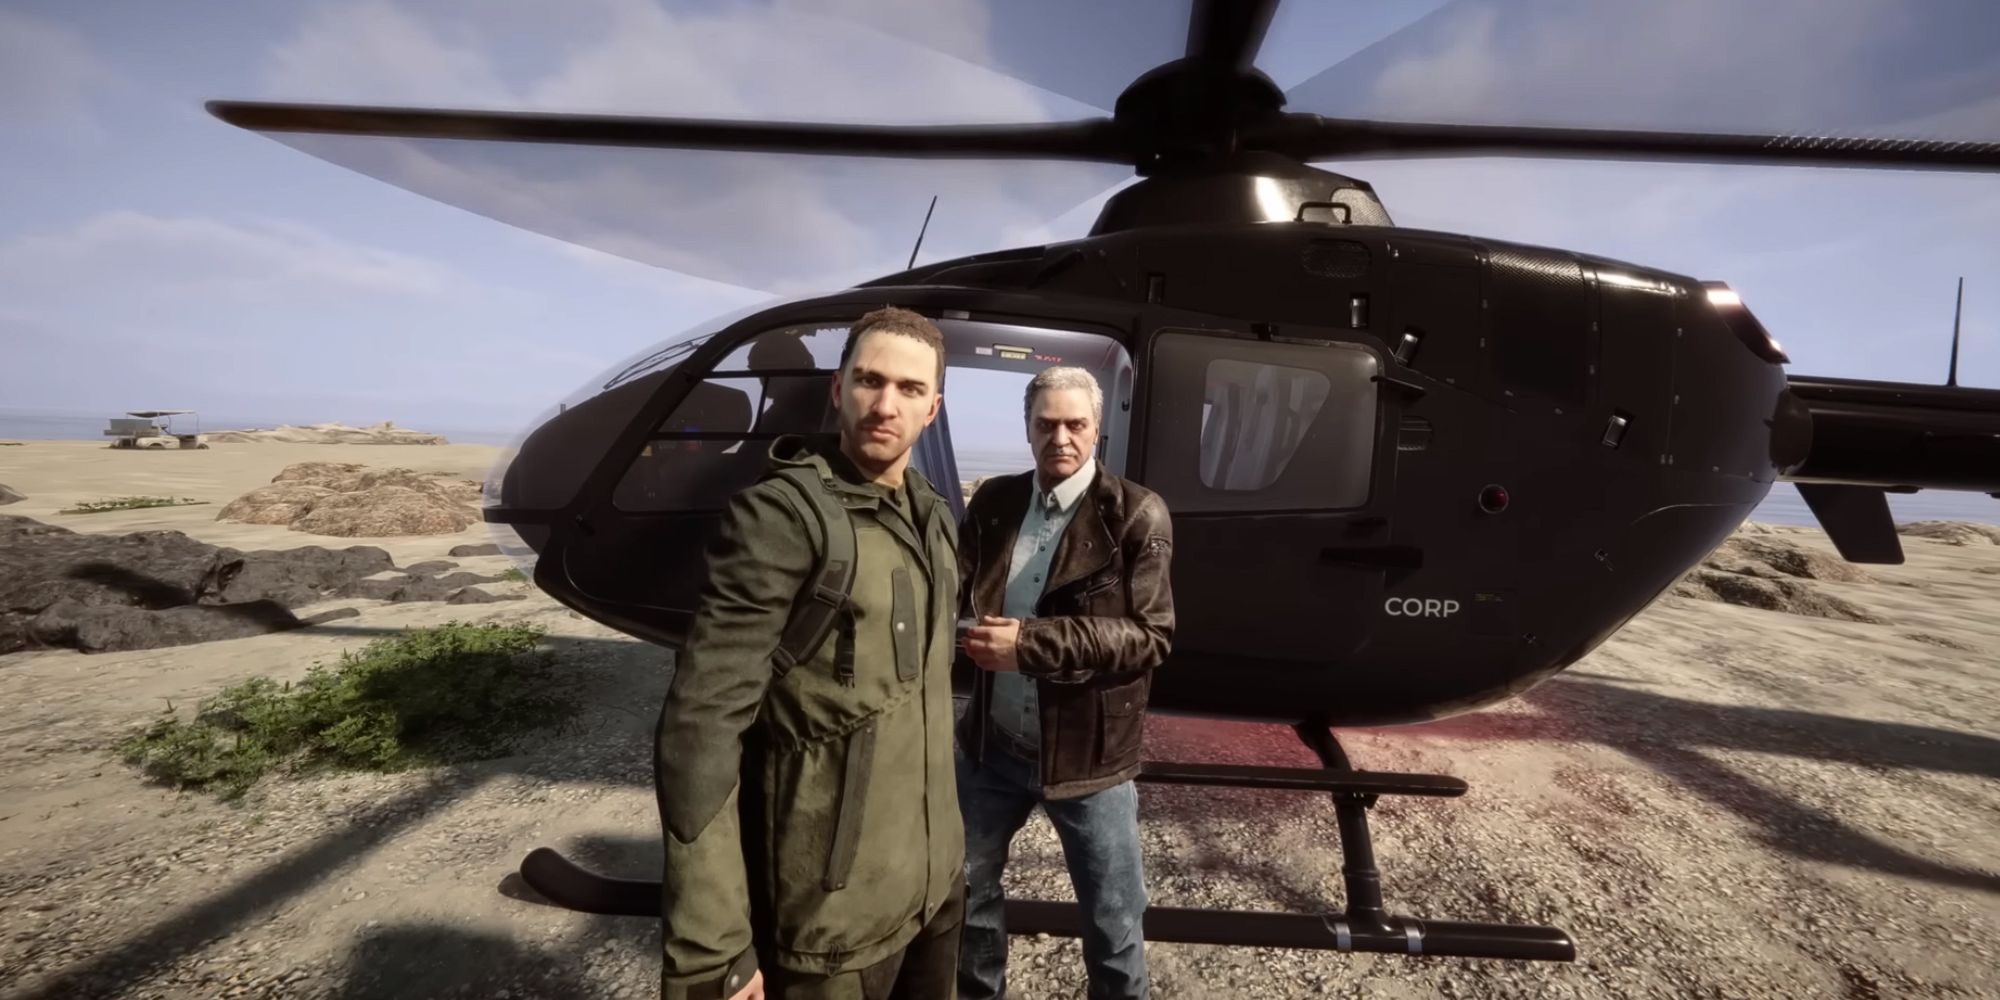 A young man and an older gentleman stand in front of a helicopter that has landed on the beach